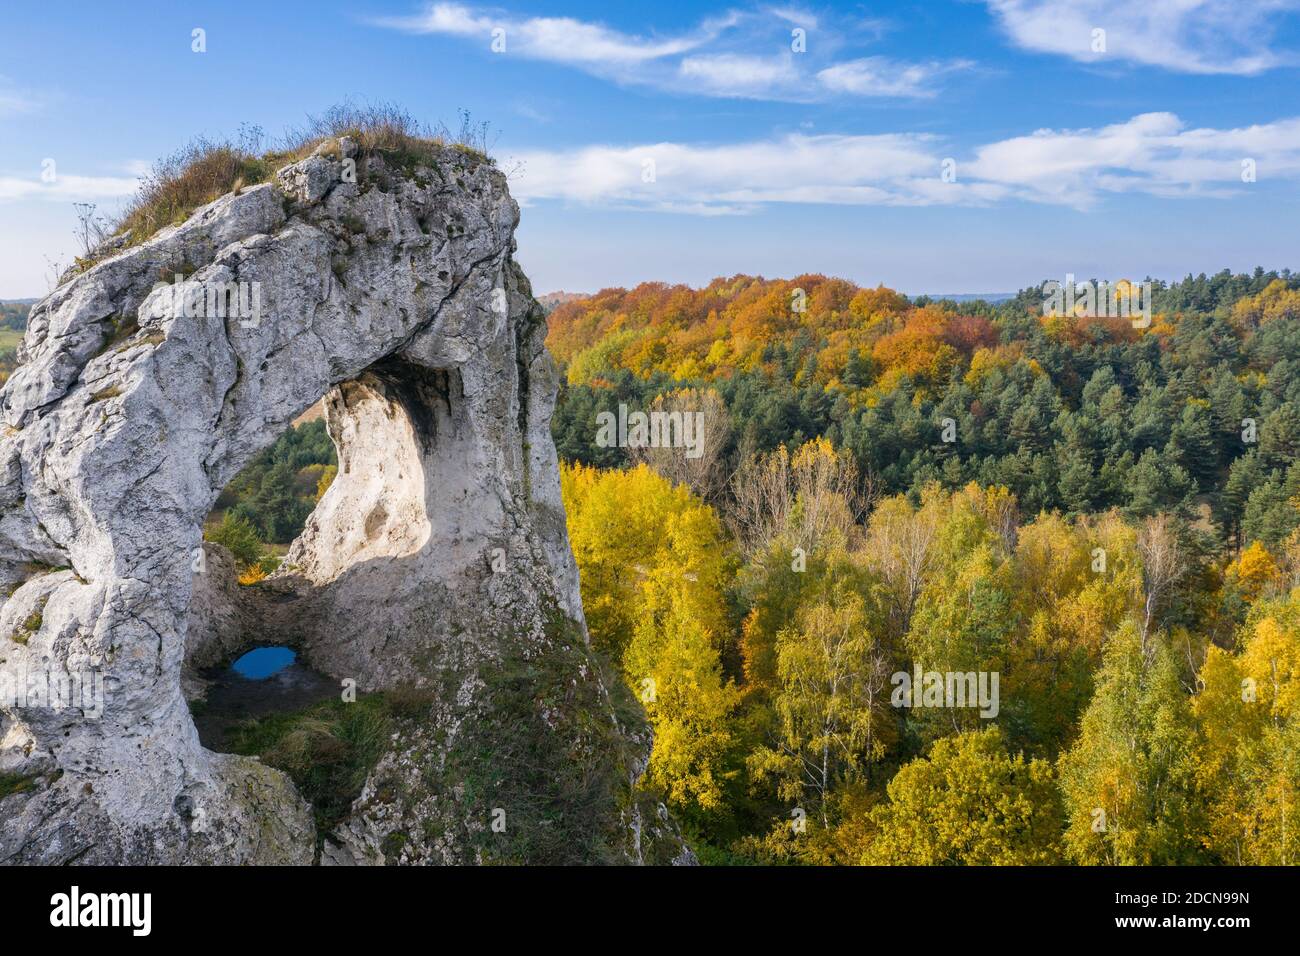 The Great Window, also known as the Large Window, is a group of limestone rocks located in Piaseczno in the Kroczyce, in Zawiercie County, in the Sile Stock Photo